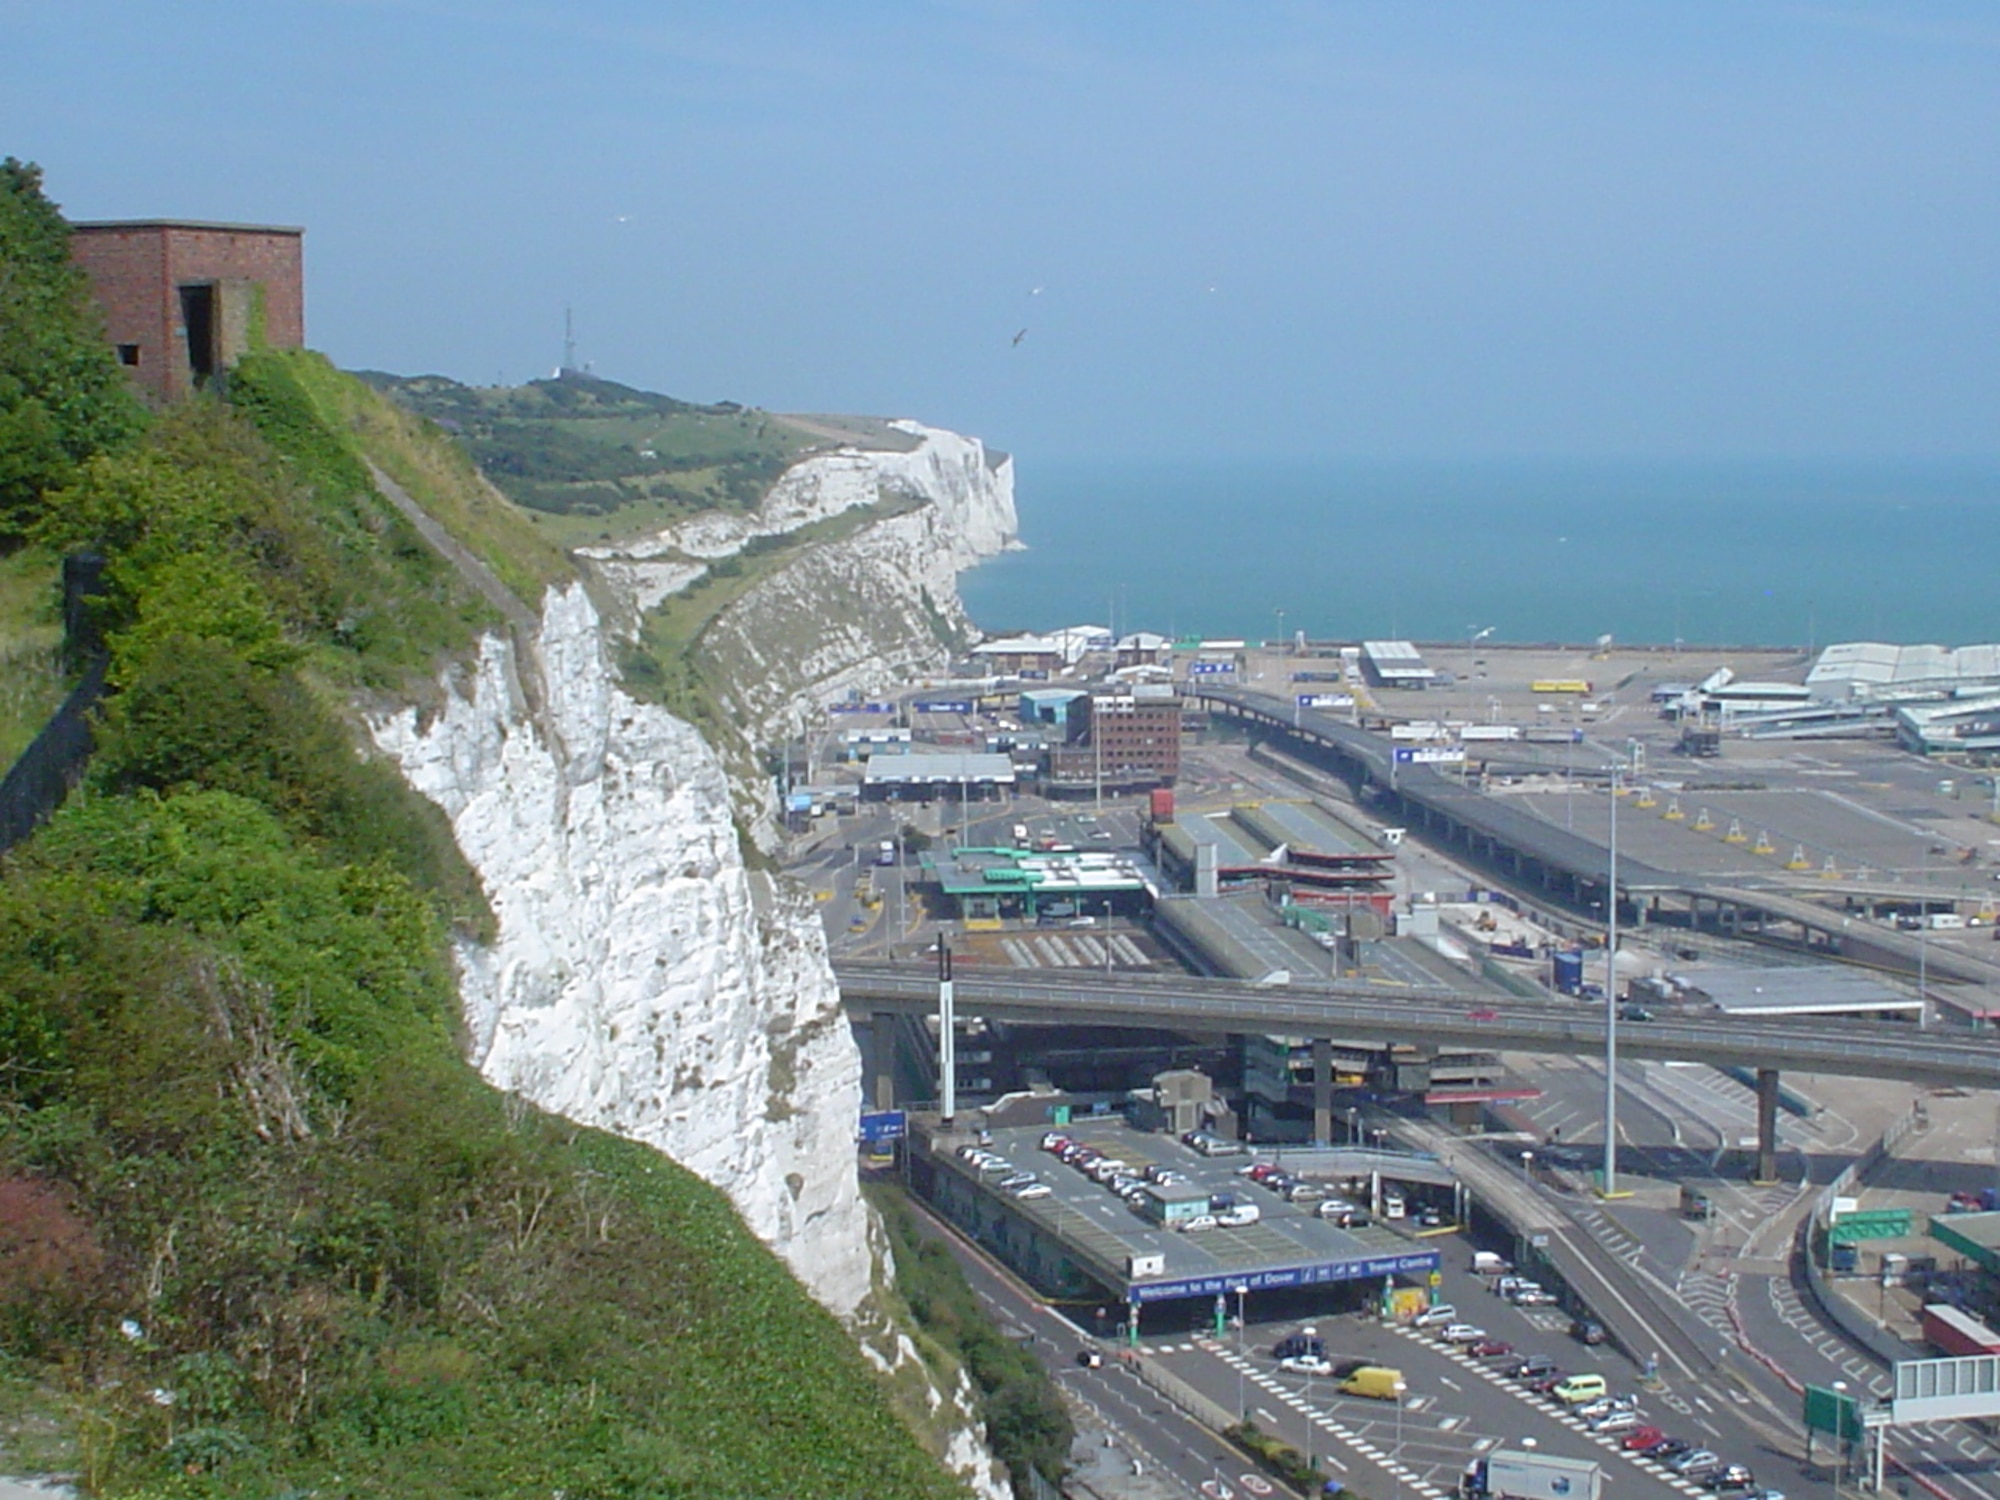 A trip to Dover Castle affords visitors an opportunity to not only see the beautiful white cliffs of Dover that Vera Lynn sang about during World War II, but also a chance to see the busy Port of Dover.  From this port, one can catch a ferry to France, take a cruise, moor a leisure craft or use the extensive port facilities for business. (U.S. Air Force photo/Capt. Alysia Harvey)